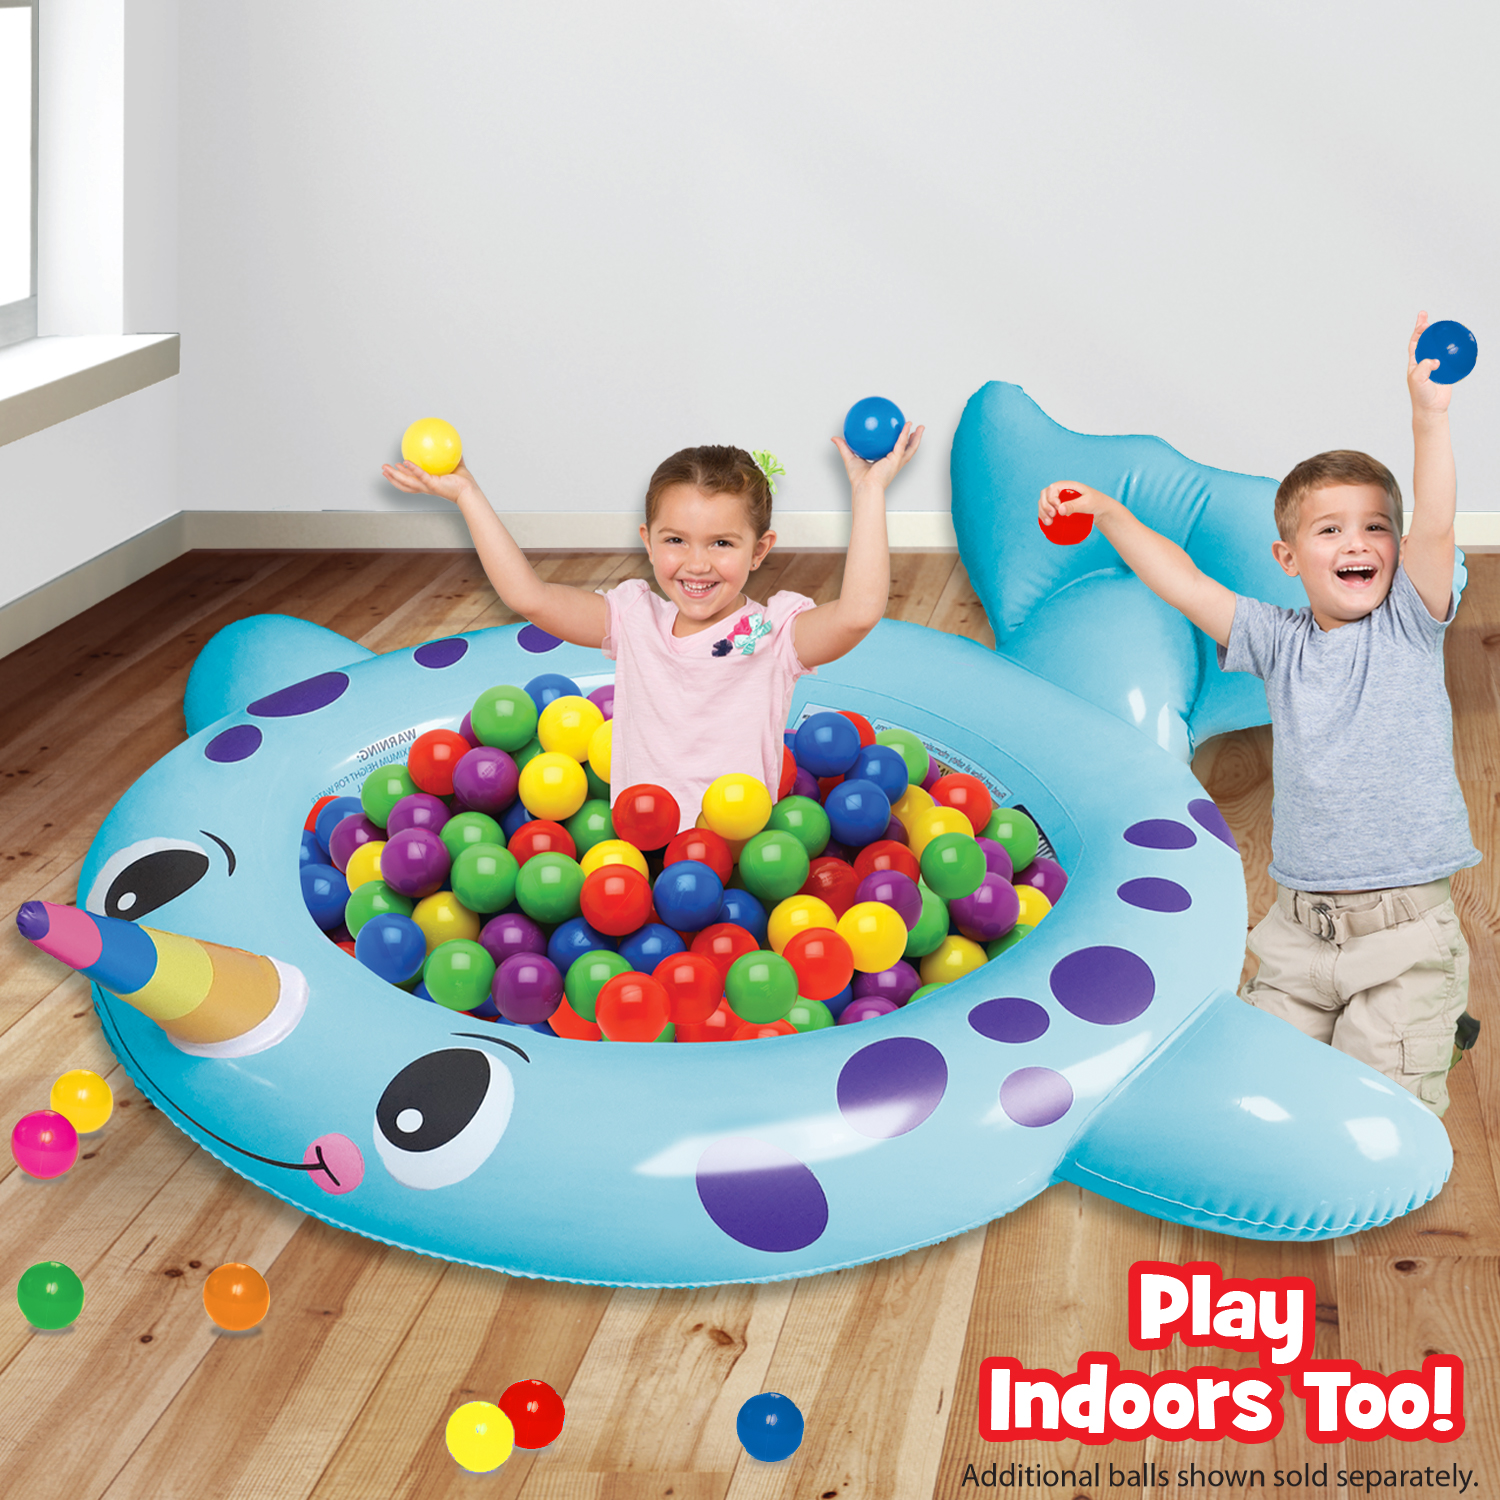 Little Tikes Narwhal 2 in1 Play Center, Ball Pit Round Splash Area, Kids 2-6 Years Old - image 4 of 5